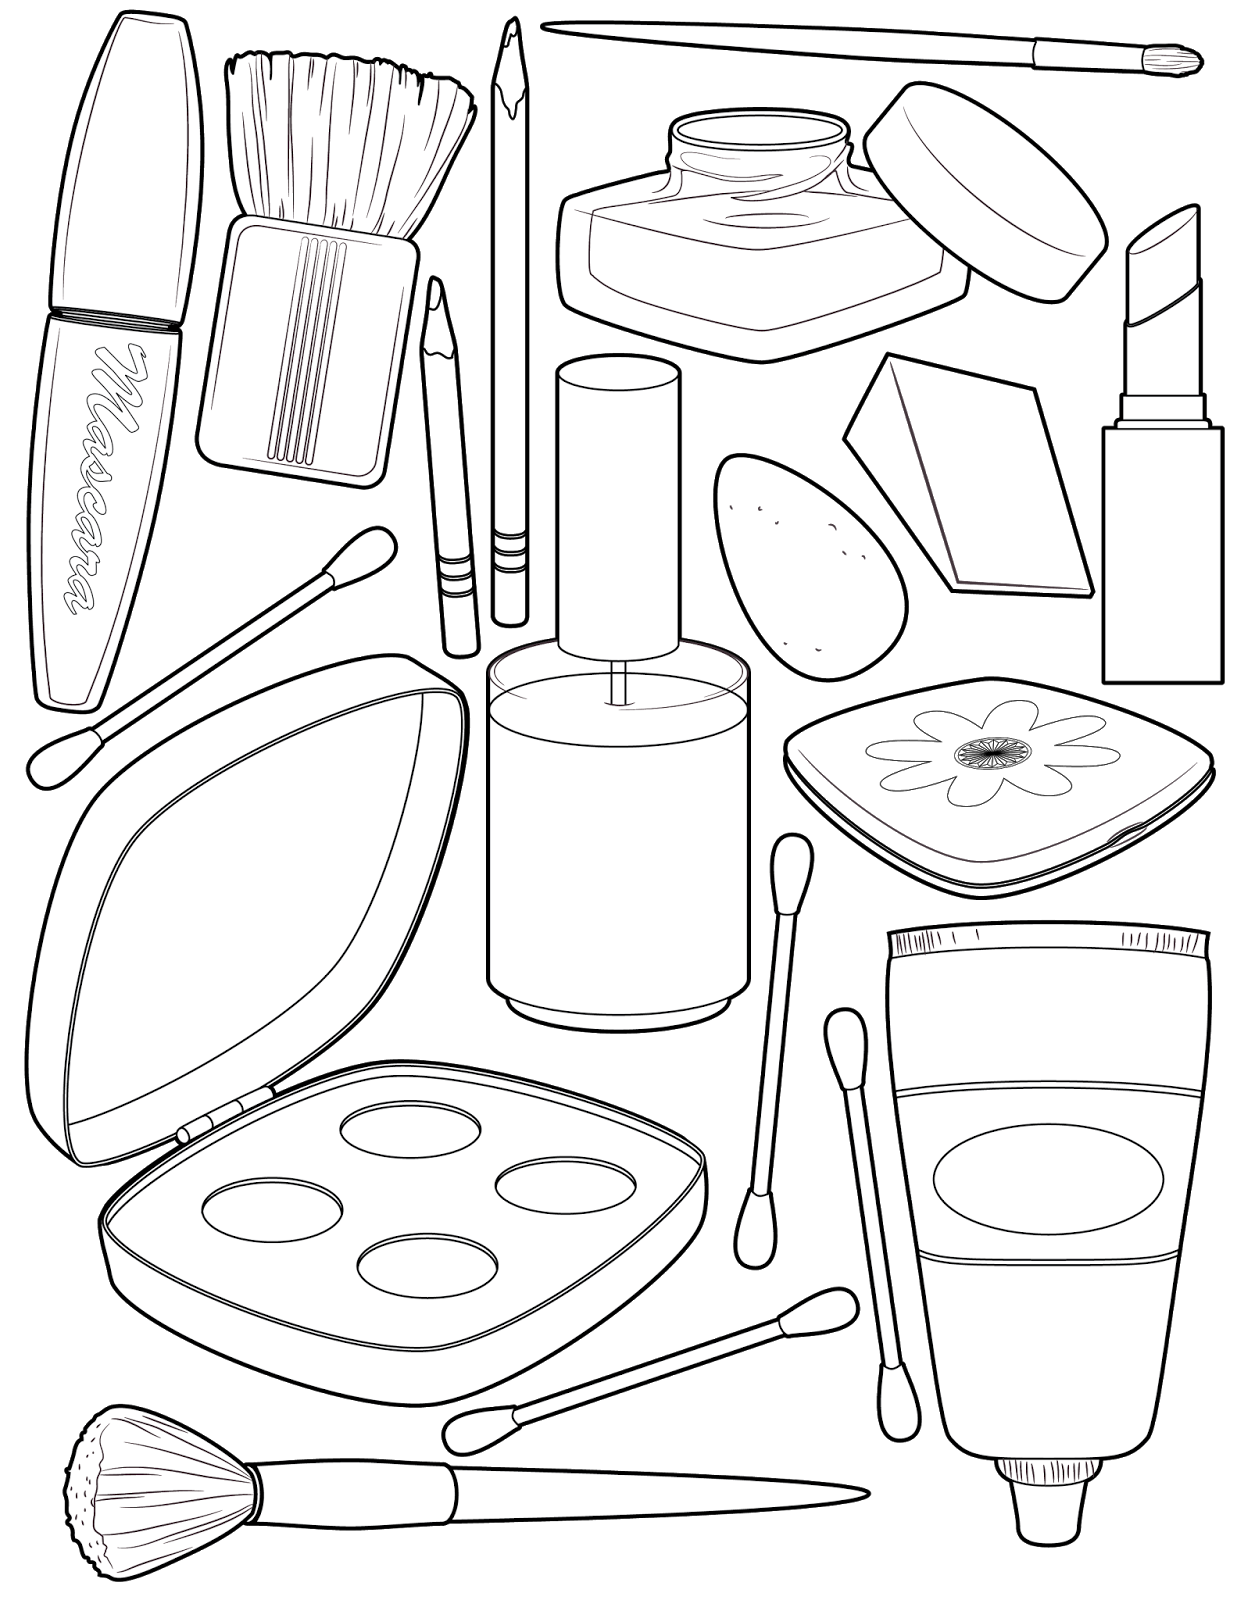 makeup-coloring-page | Coloring sheets, Blank coloring pages ...